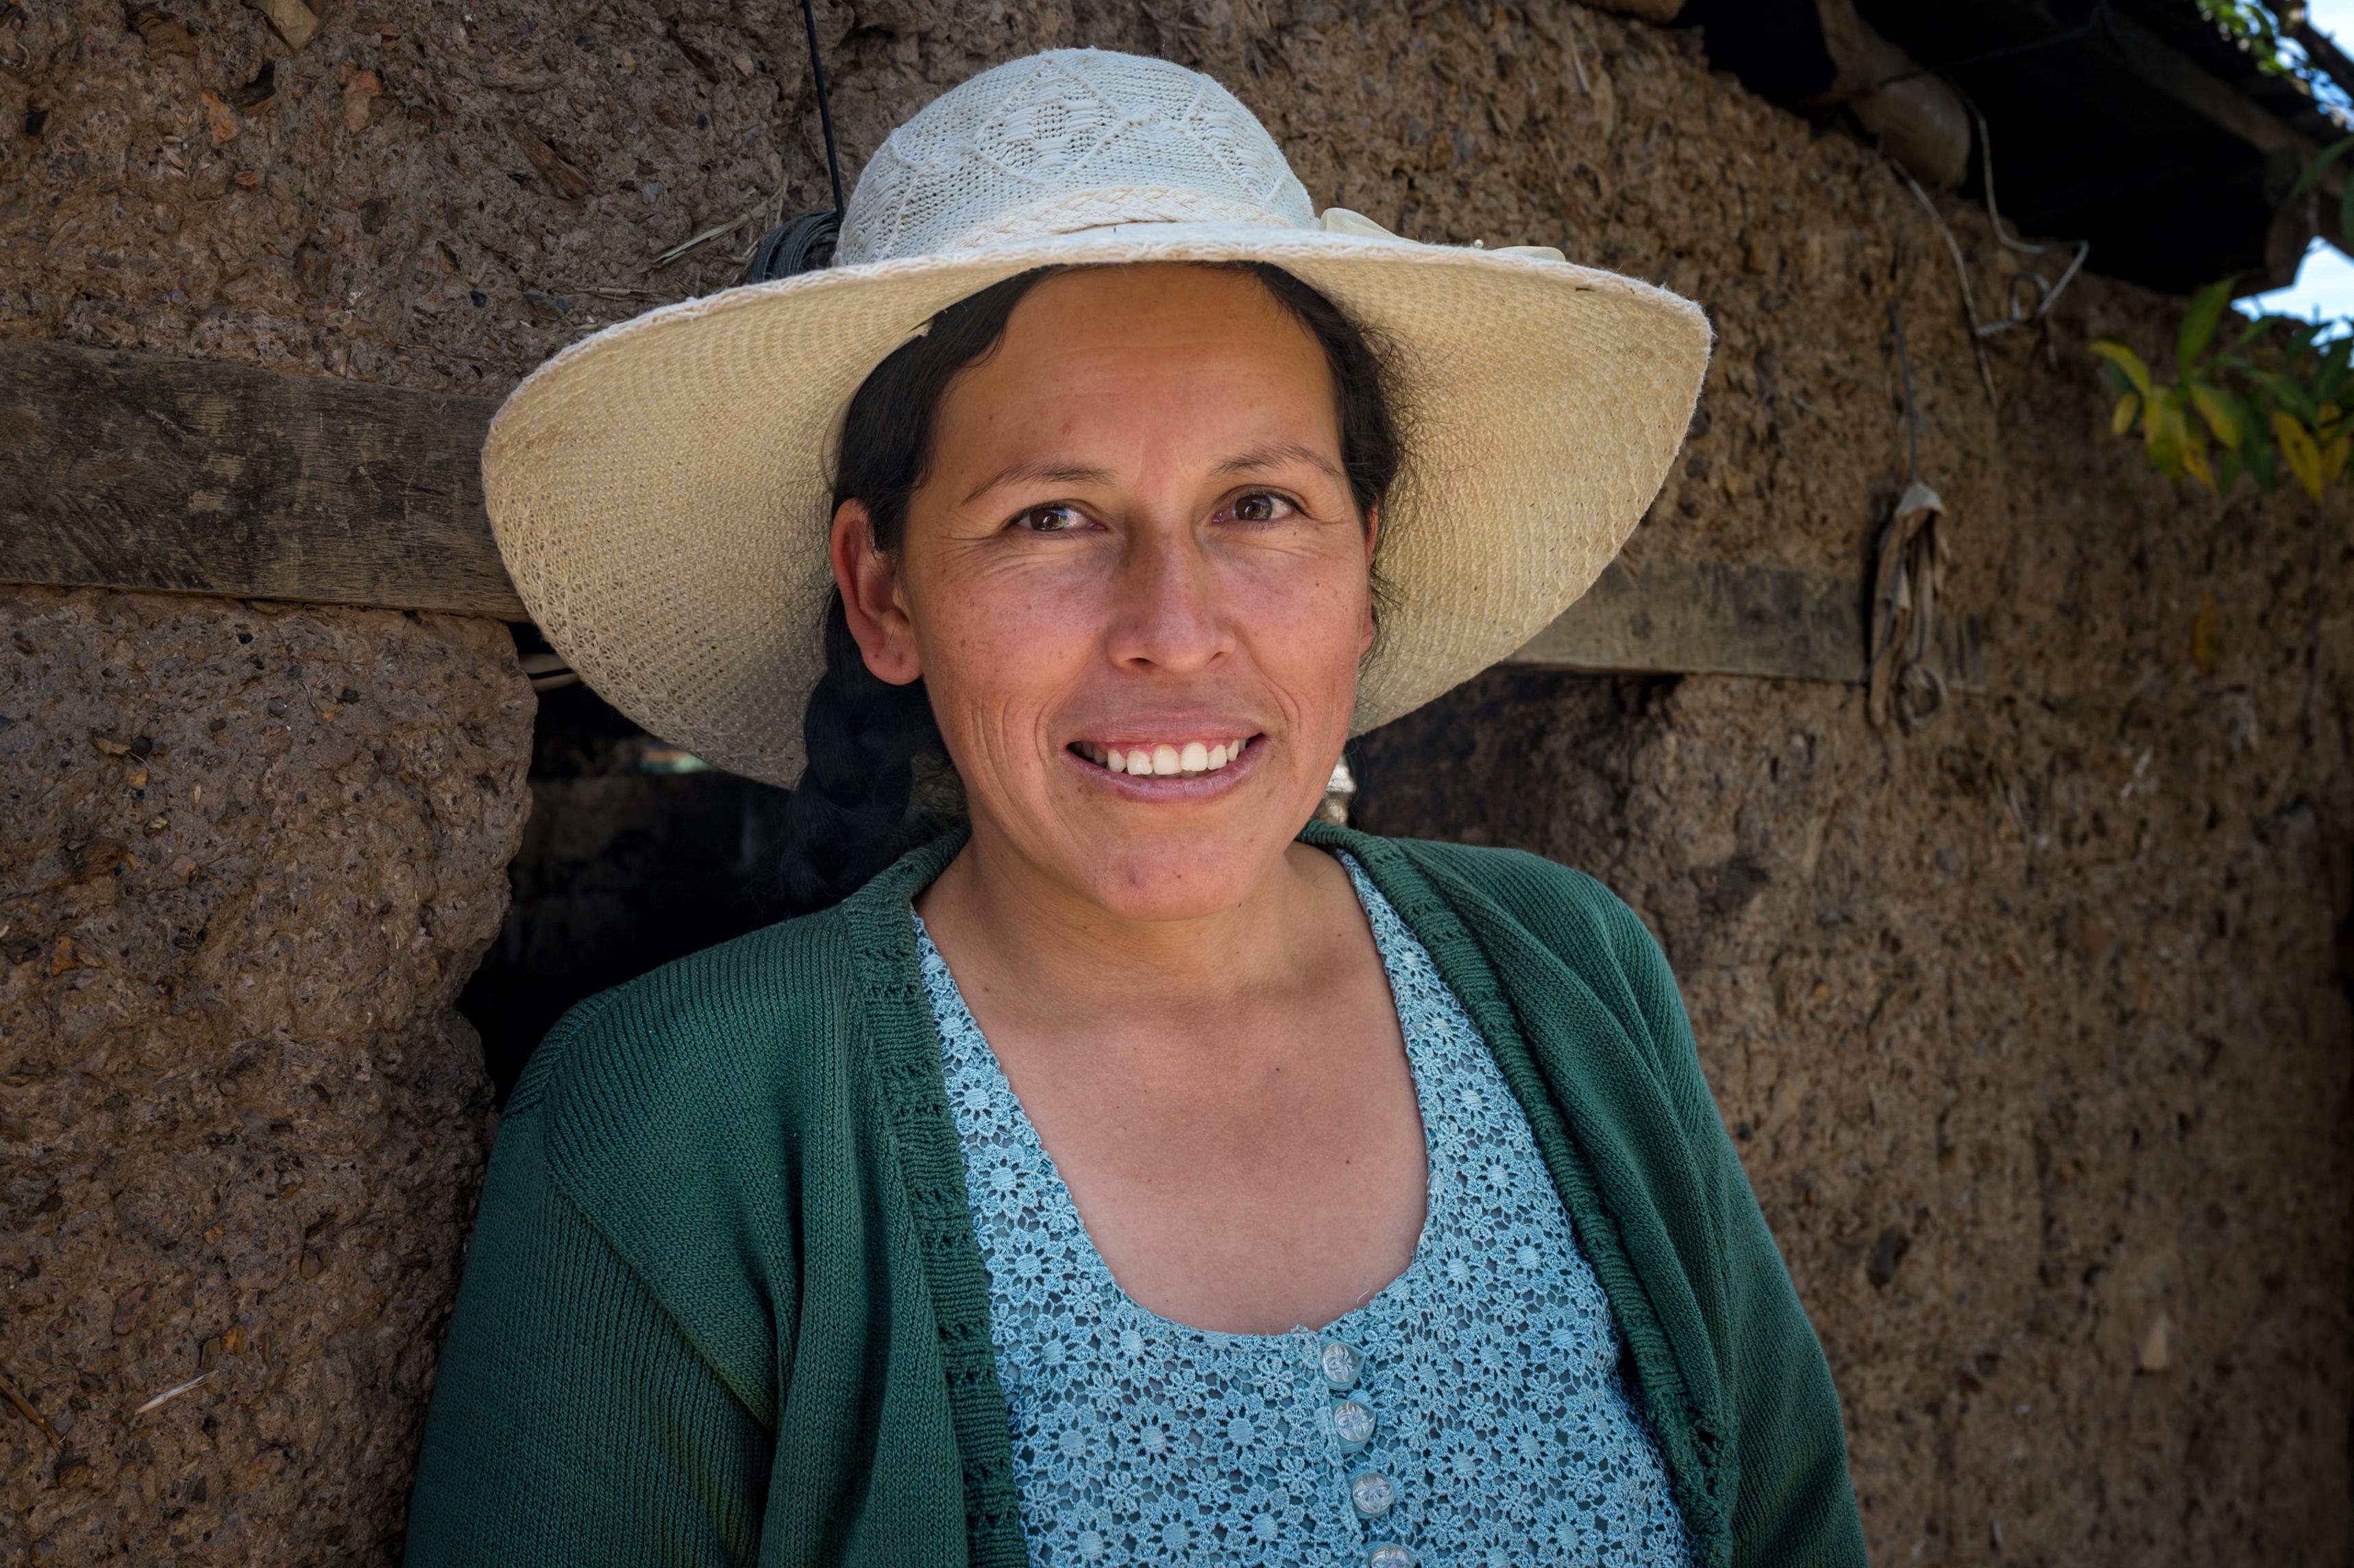 A smiling woman with a white hat stands before a stone wall.